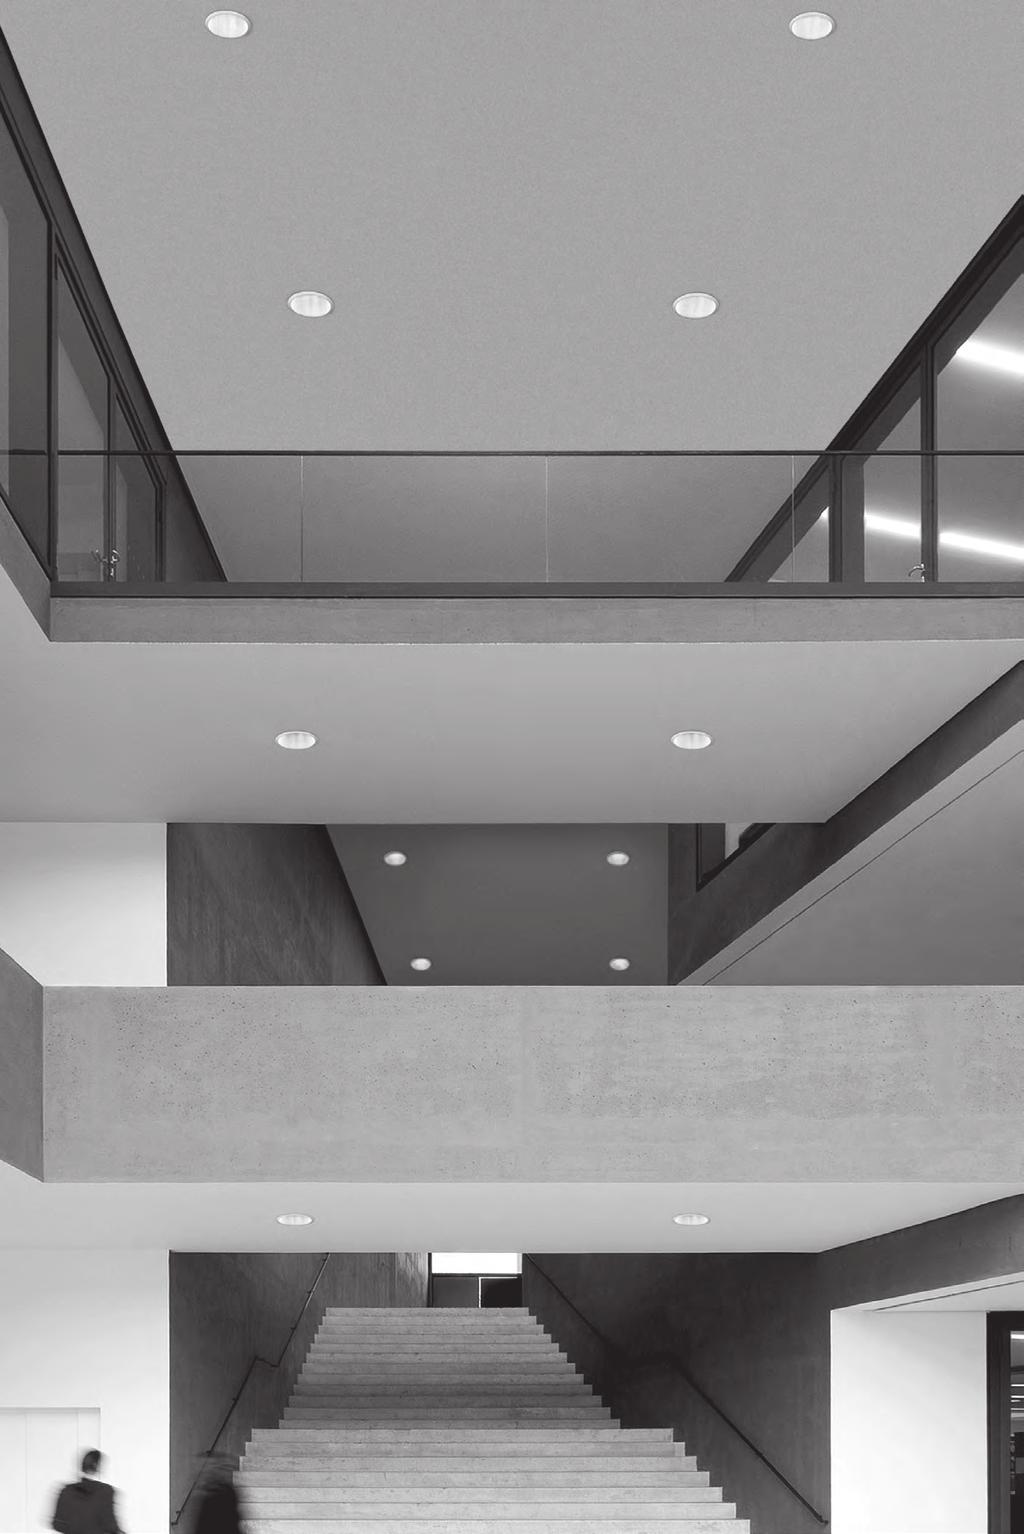 EFFICIENTLY FLEXIBLE ID LED adapts to each high ceiling application, offering maximum design flexibility.